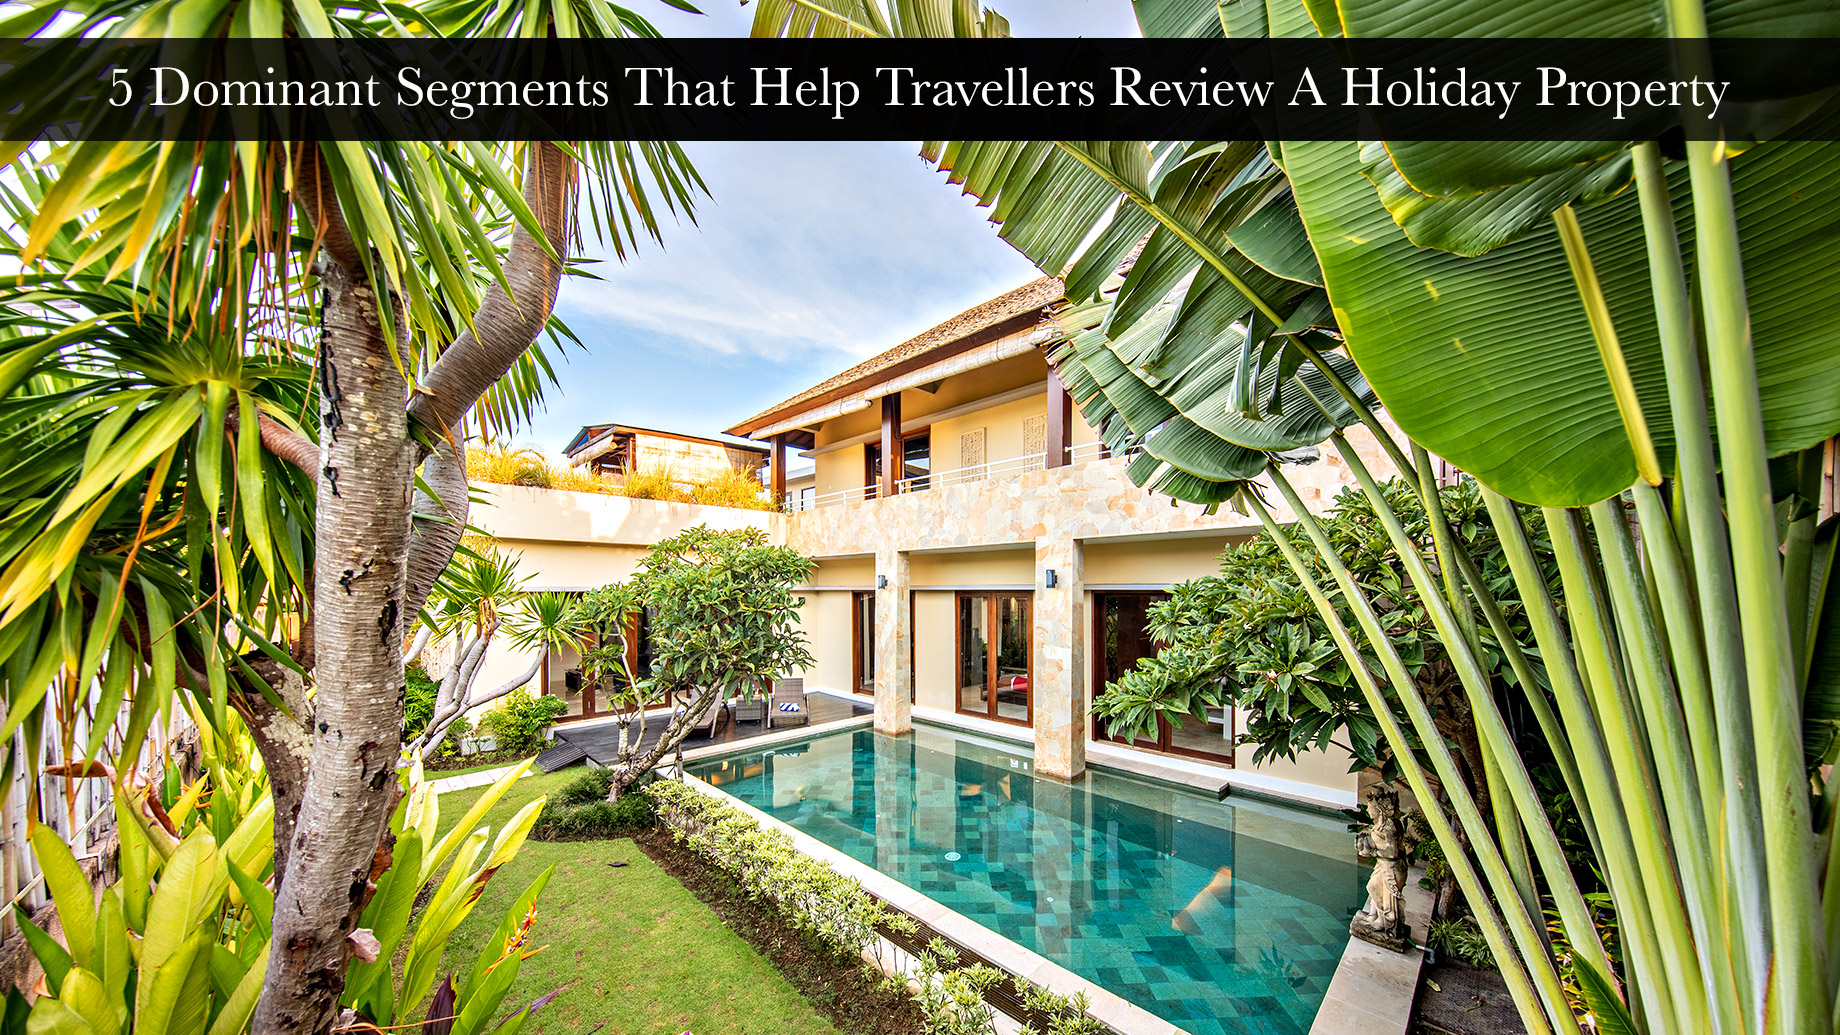 5 Dominant Segments That Help Travellers Review A Holiday Property